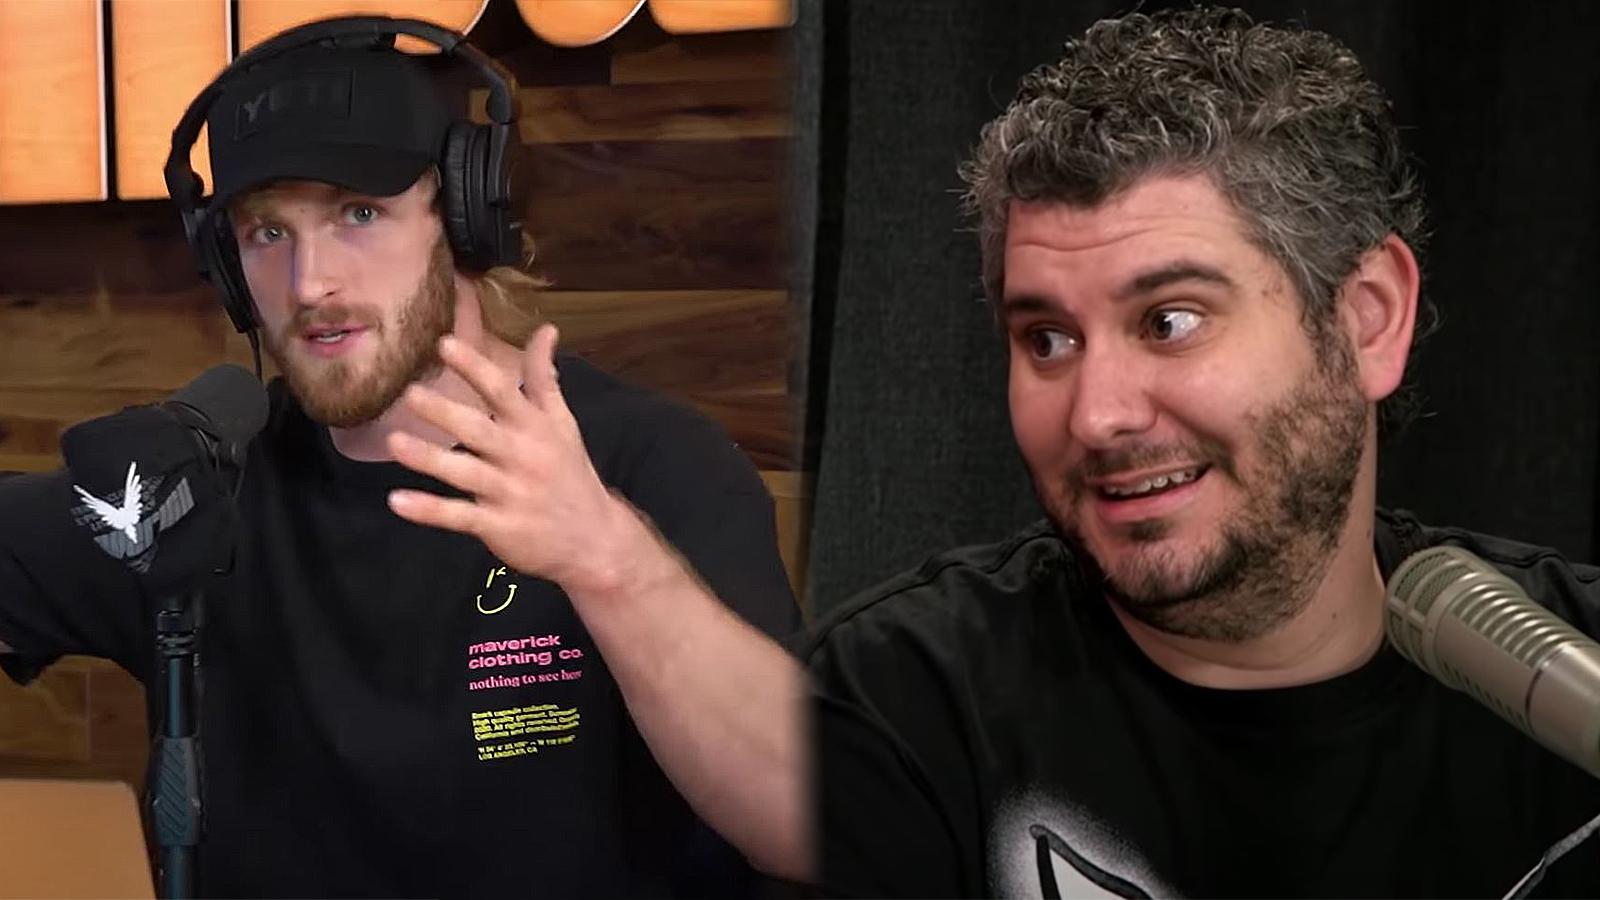 Ethan Klein hits out at Logan Paul over stalker comments